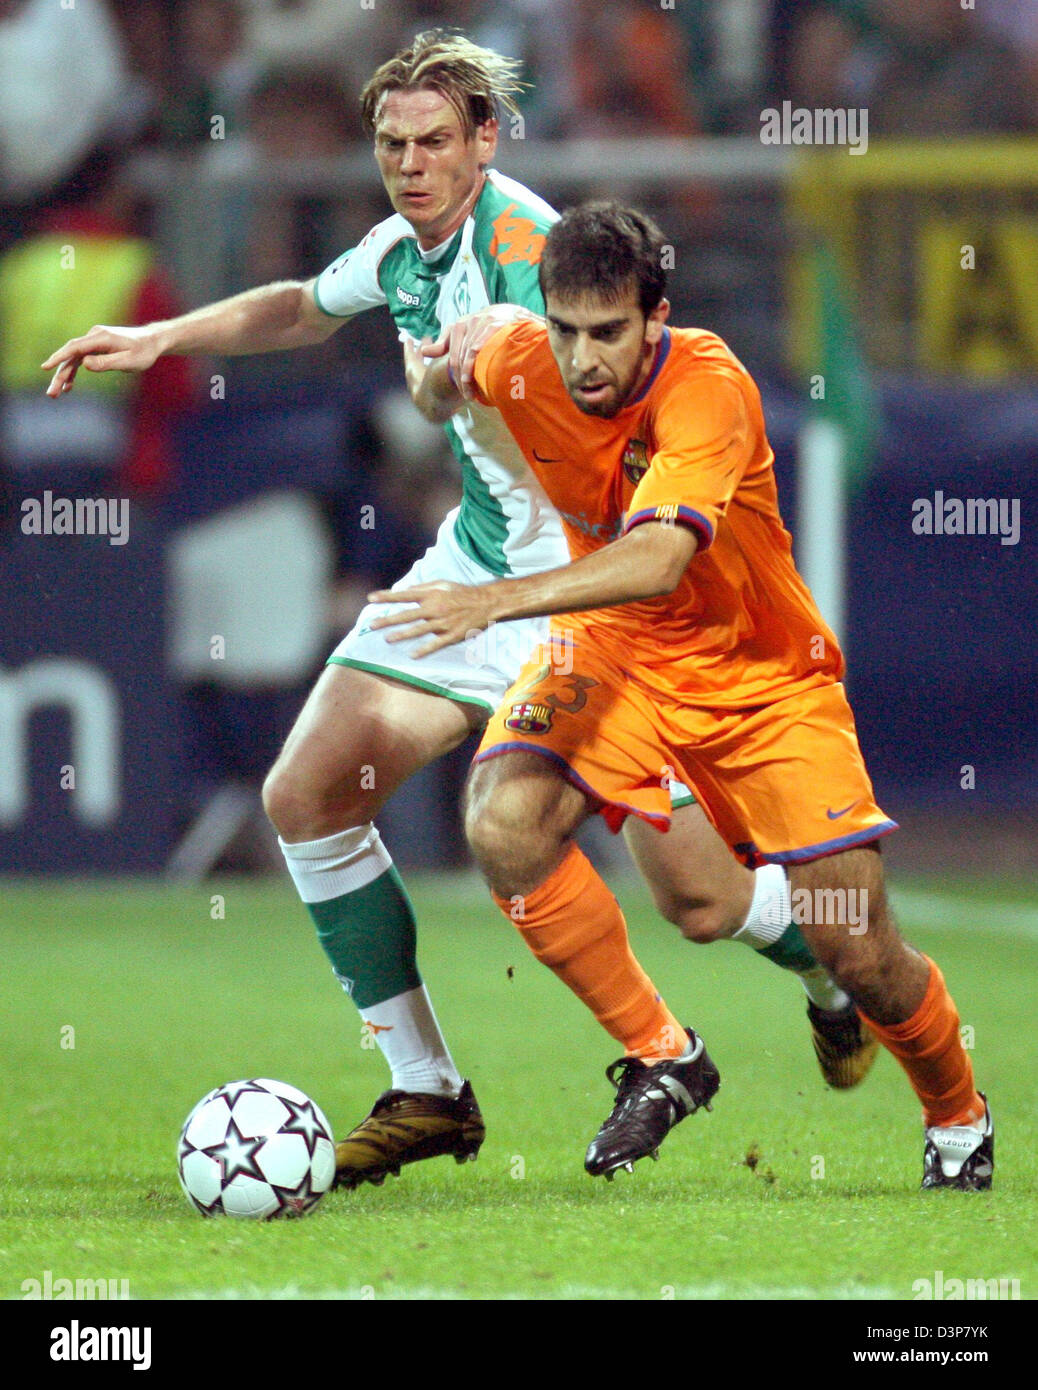 FC Barcelona's Presas Oleguer (R) vies with SV Werder Bremen's Tim Borowski for the ball during the UEFA Champions League first round match at the Weser stadium in Bremen, Germany, Wednesday, 27 September 2006. Photo: Kay Nietfeld Stock Photo